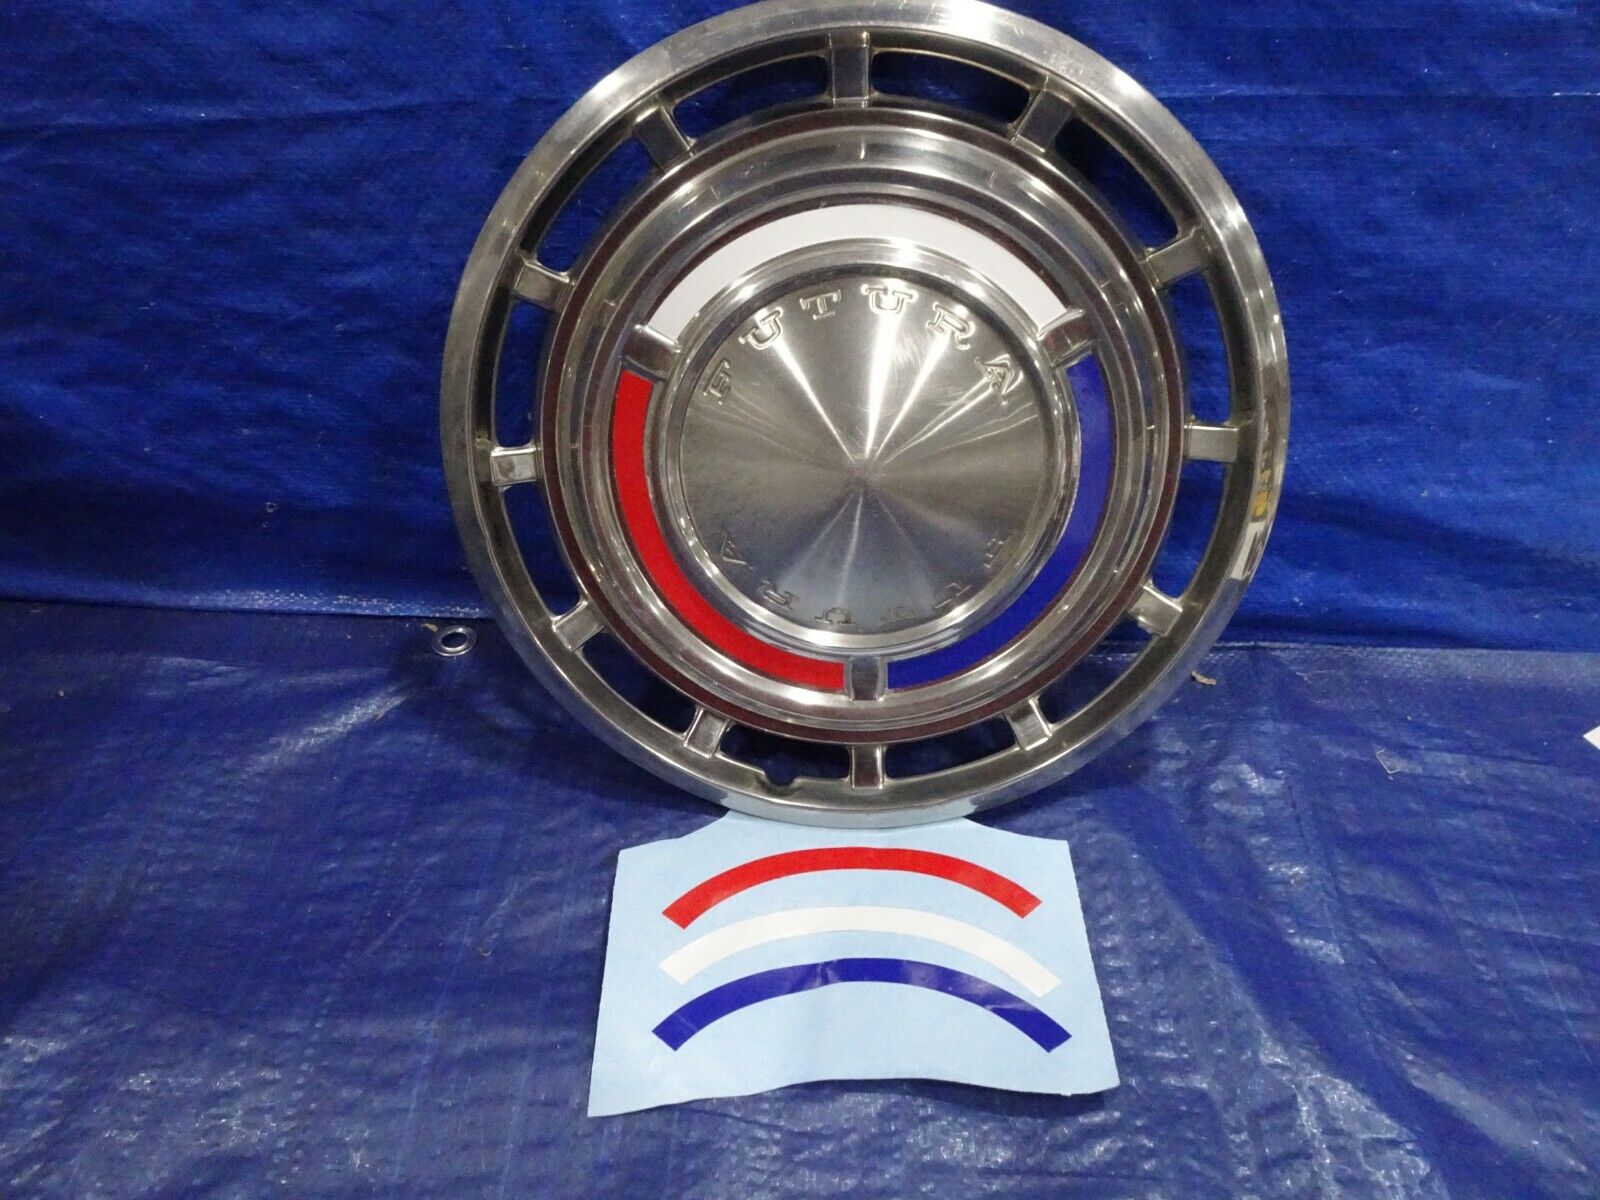 62 - 63 Ford Falcon Futura Hubcap wheel cover red white blue decal set of 4 new